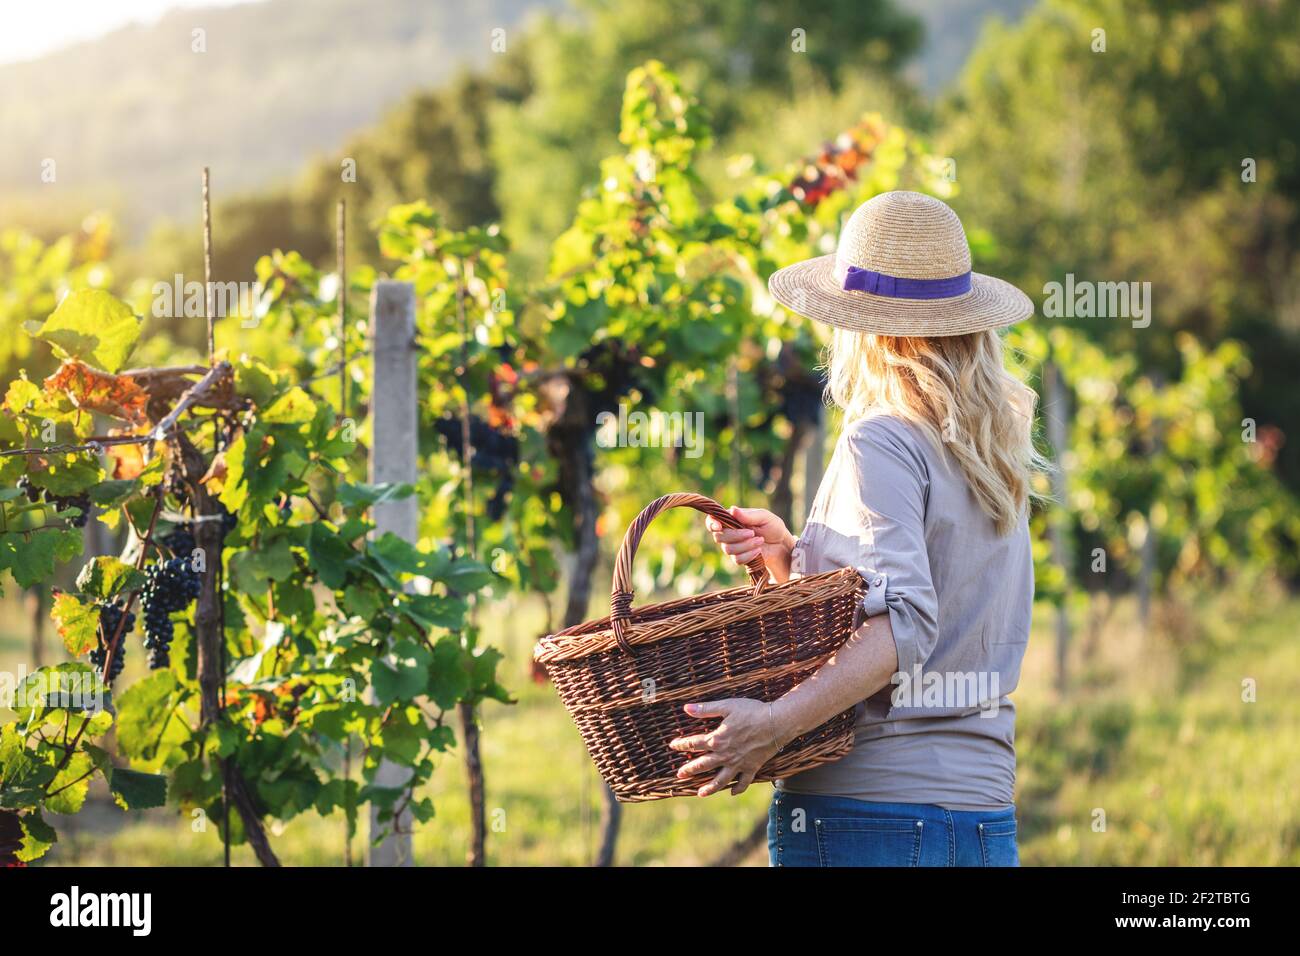 Farmer is ready for harvesting grapes at vineyard. Woman holding wicker basket. Agricultural occupation Stock Photo